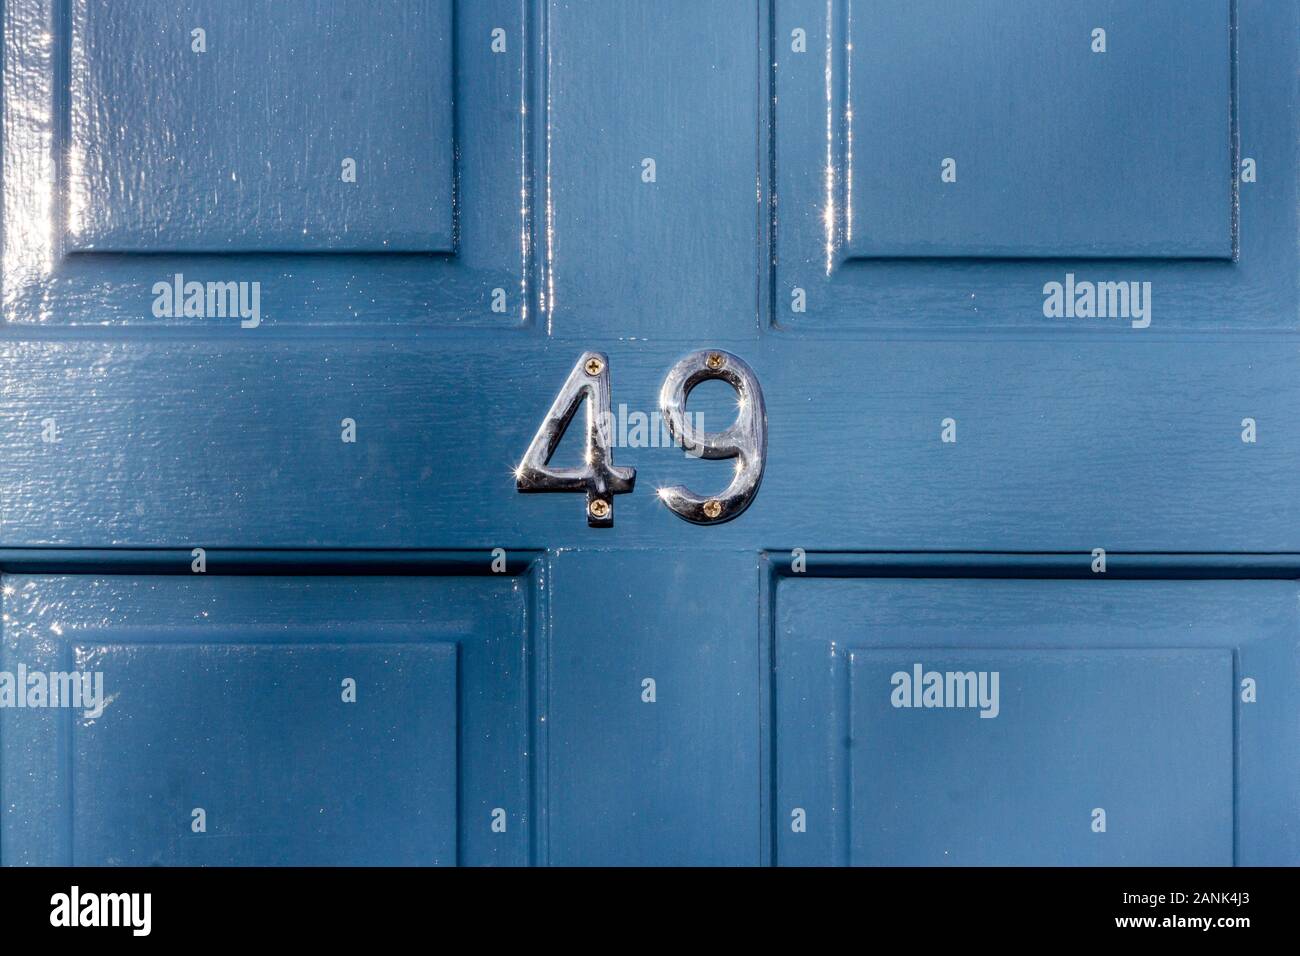 House number 49 Stock Photo